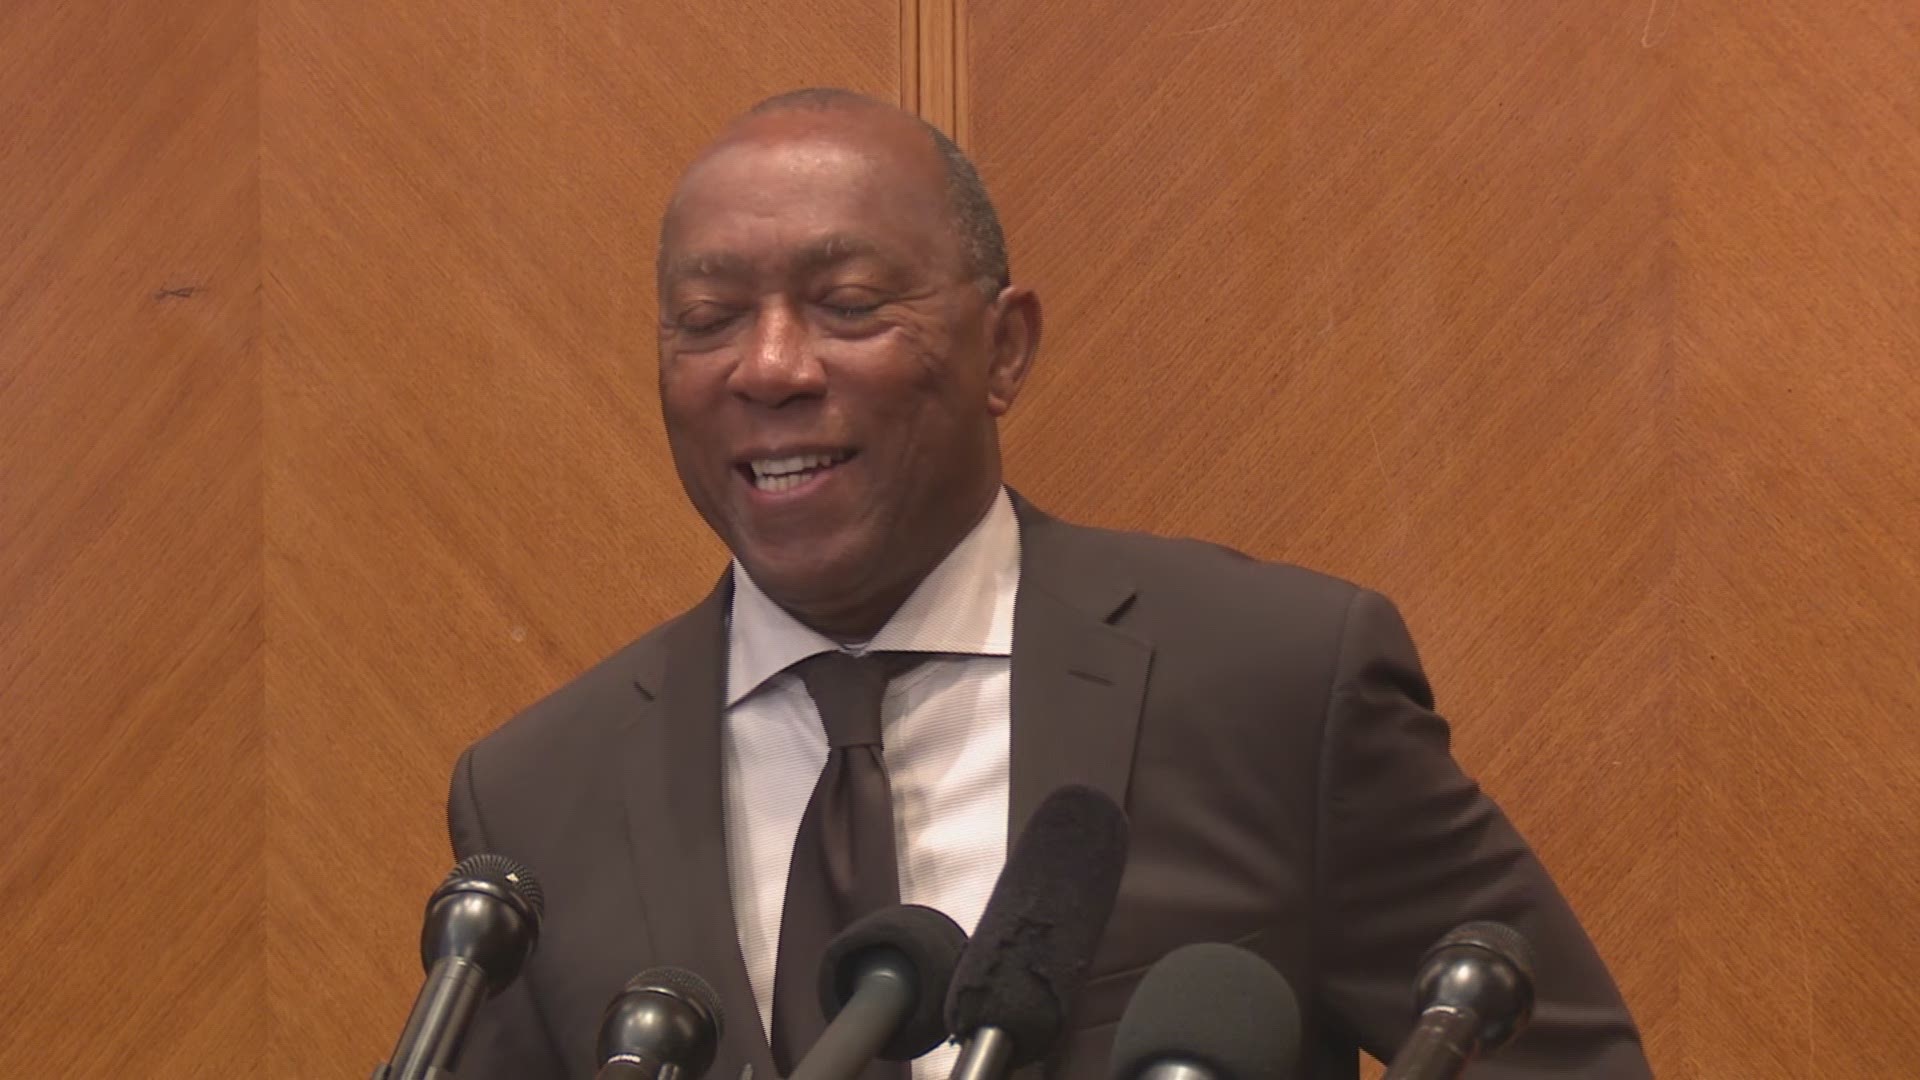 Mayor Sylvester Turner gives well-wishes to Mattress Mac and hopes for a fast recovery.